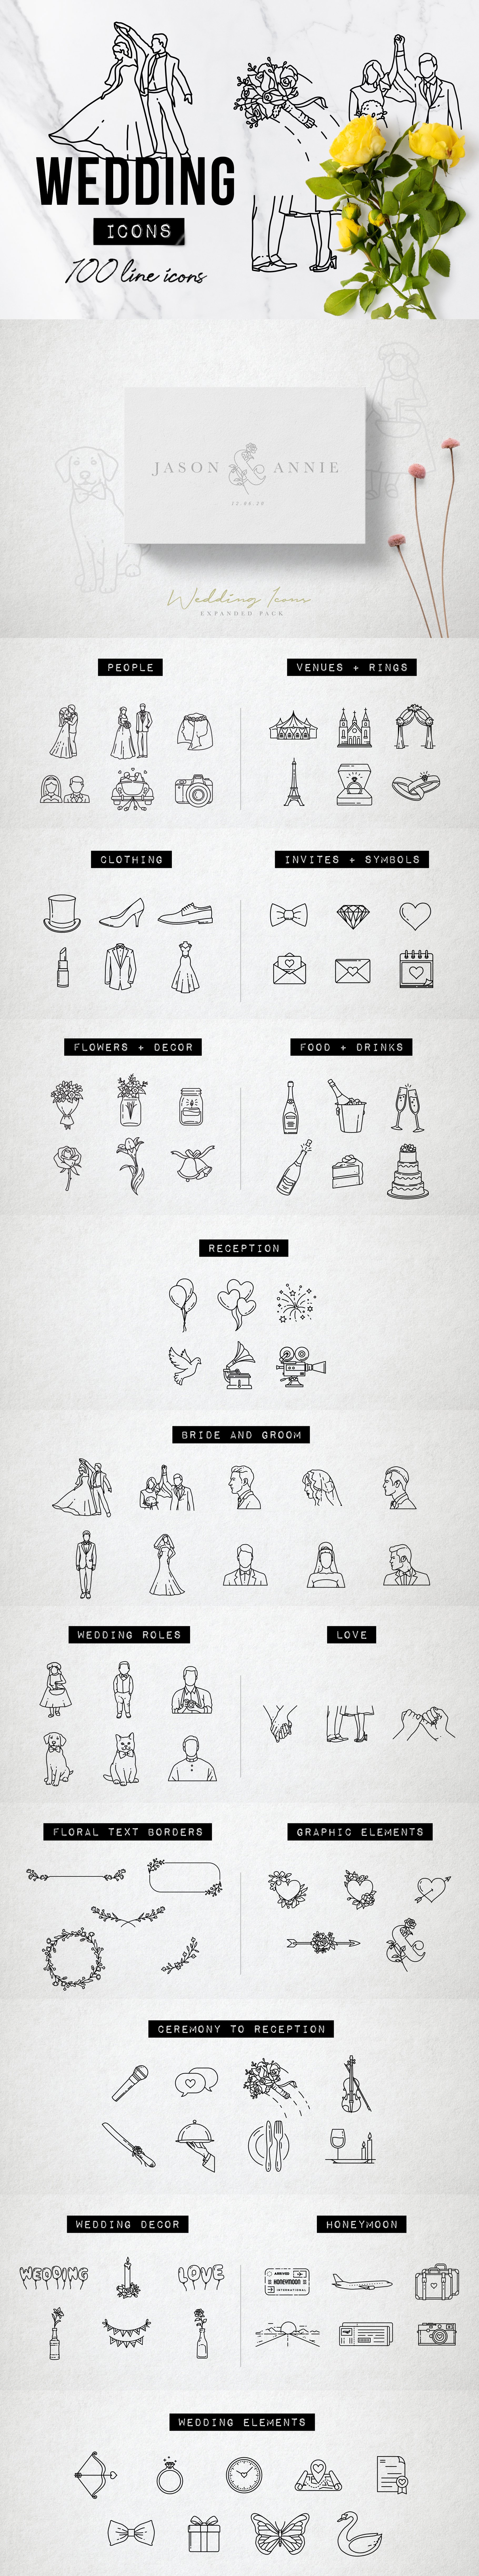 100 Wedding Icons Set - Expanded cover image.